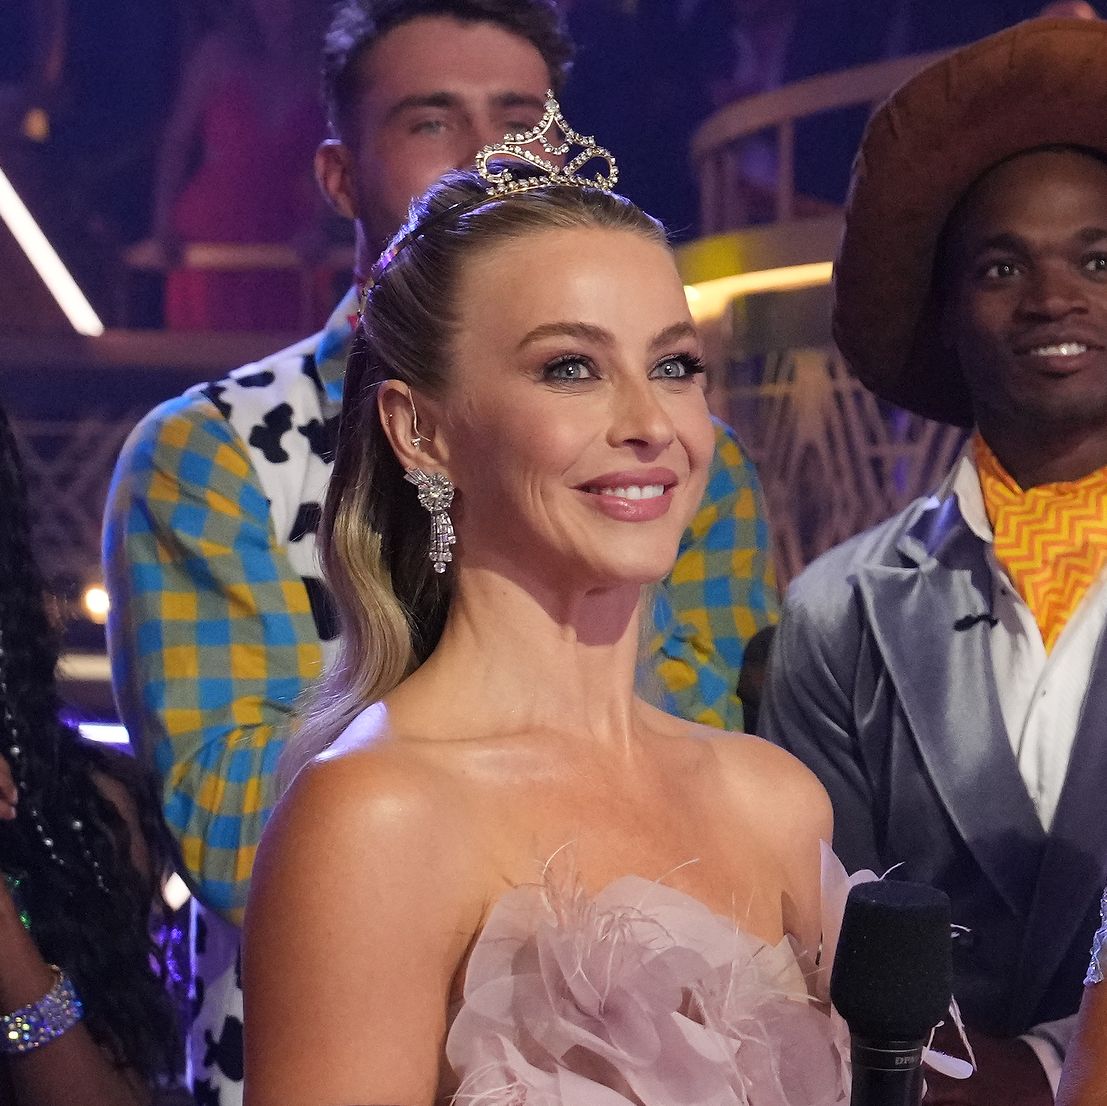 The Latest 'Dancing With the Stars' Announcement Sparks Major Controversy on Social Media